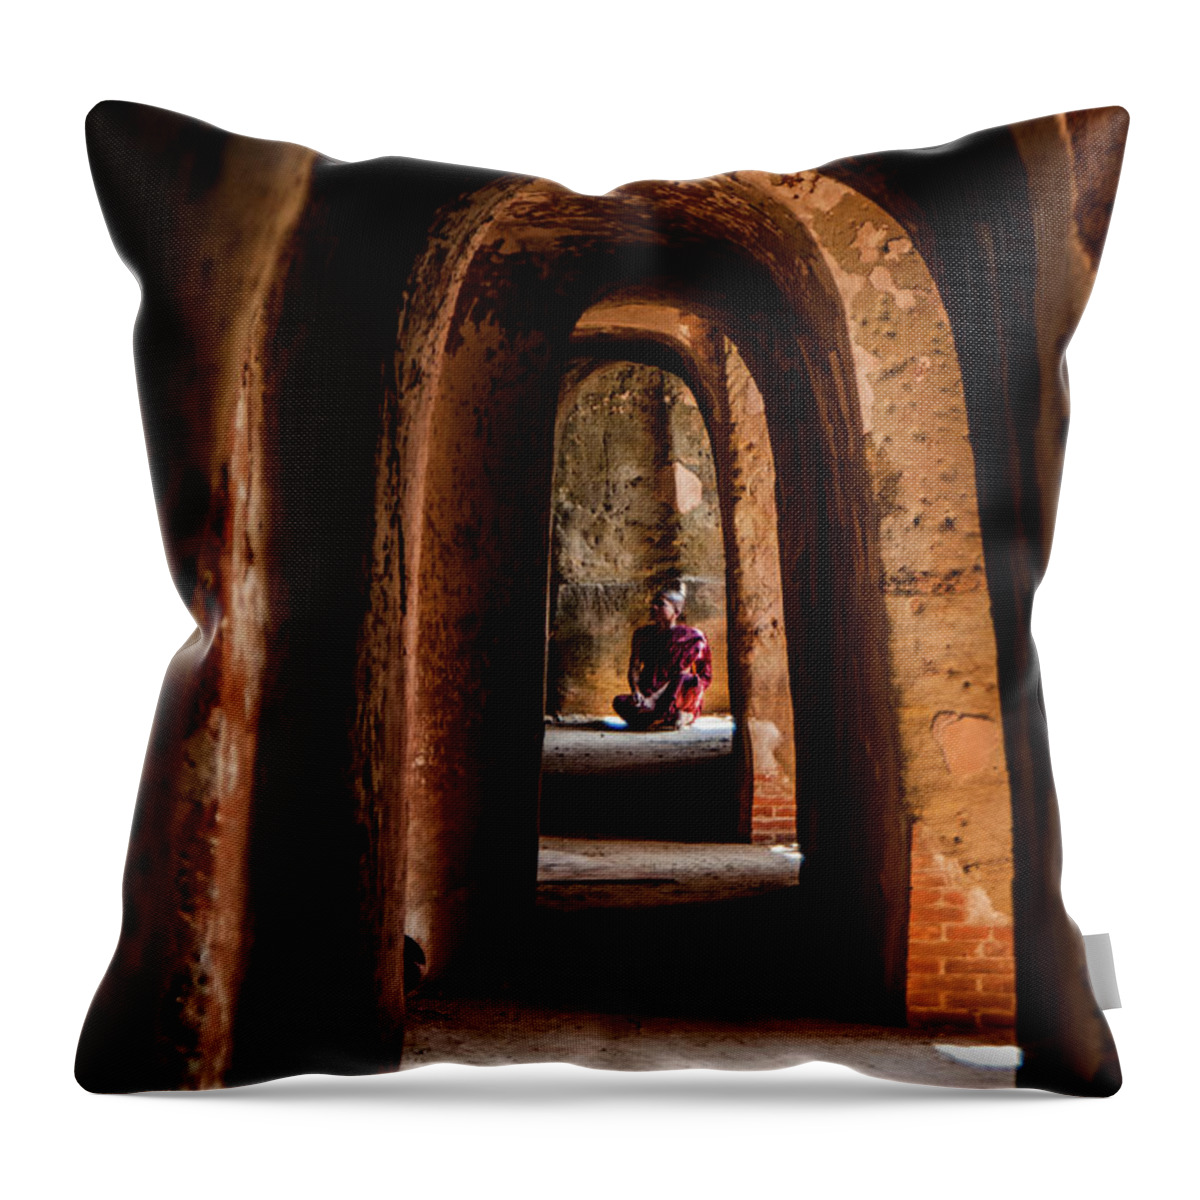 Buddhist Throw Pillow featuring the photograph Young Buddhist Monk Praying by Arj Munoz